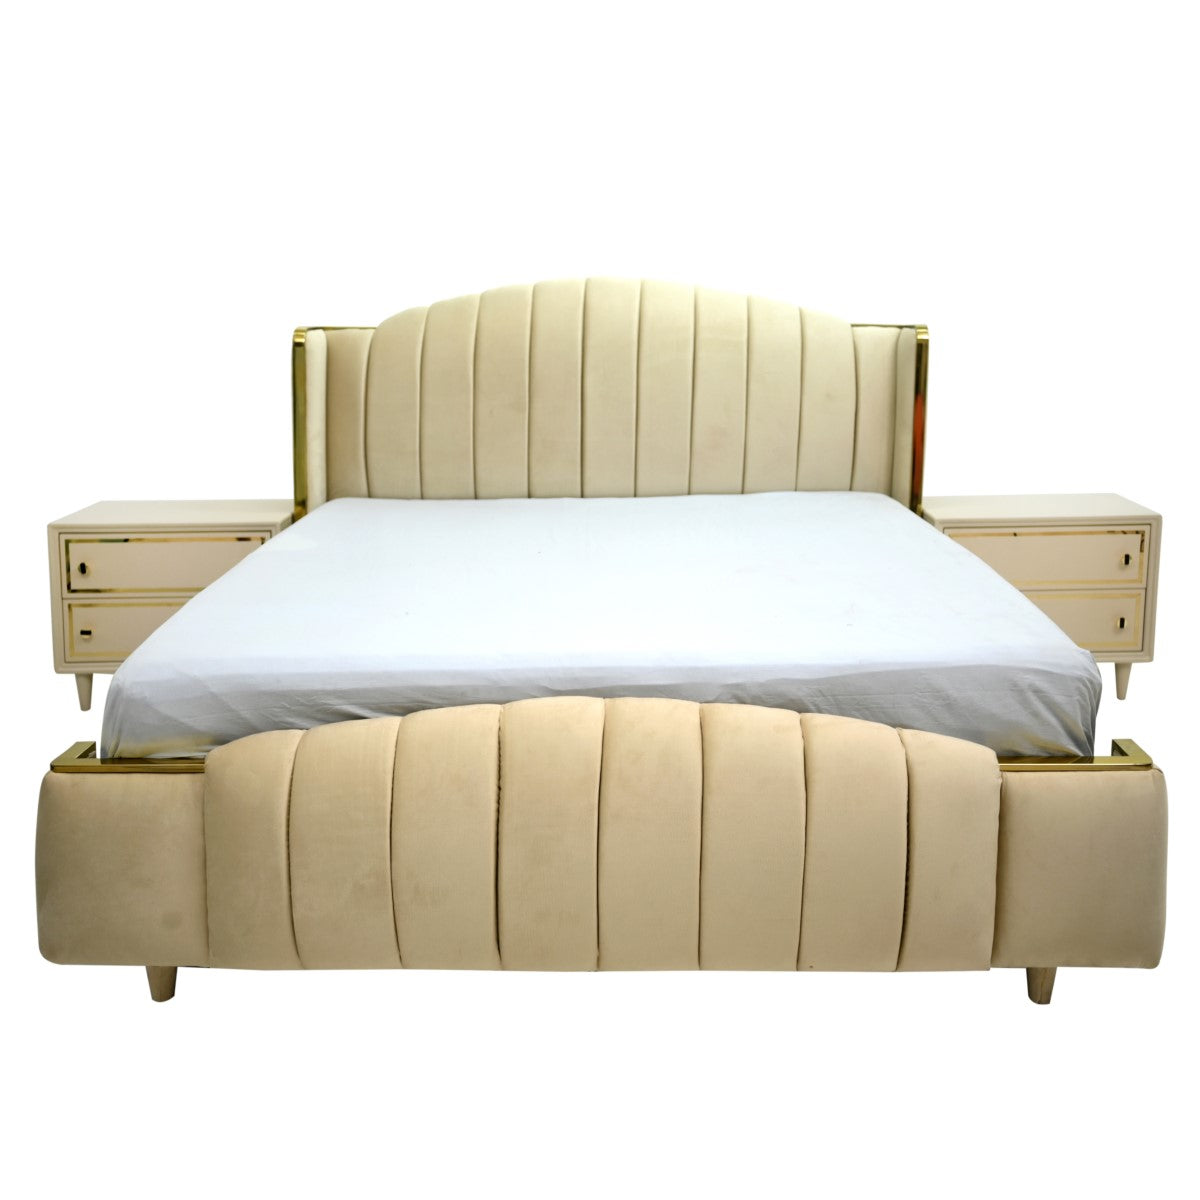 Opulent King Size Bed with 2 Side Tables